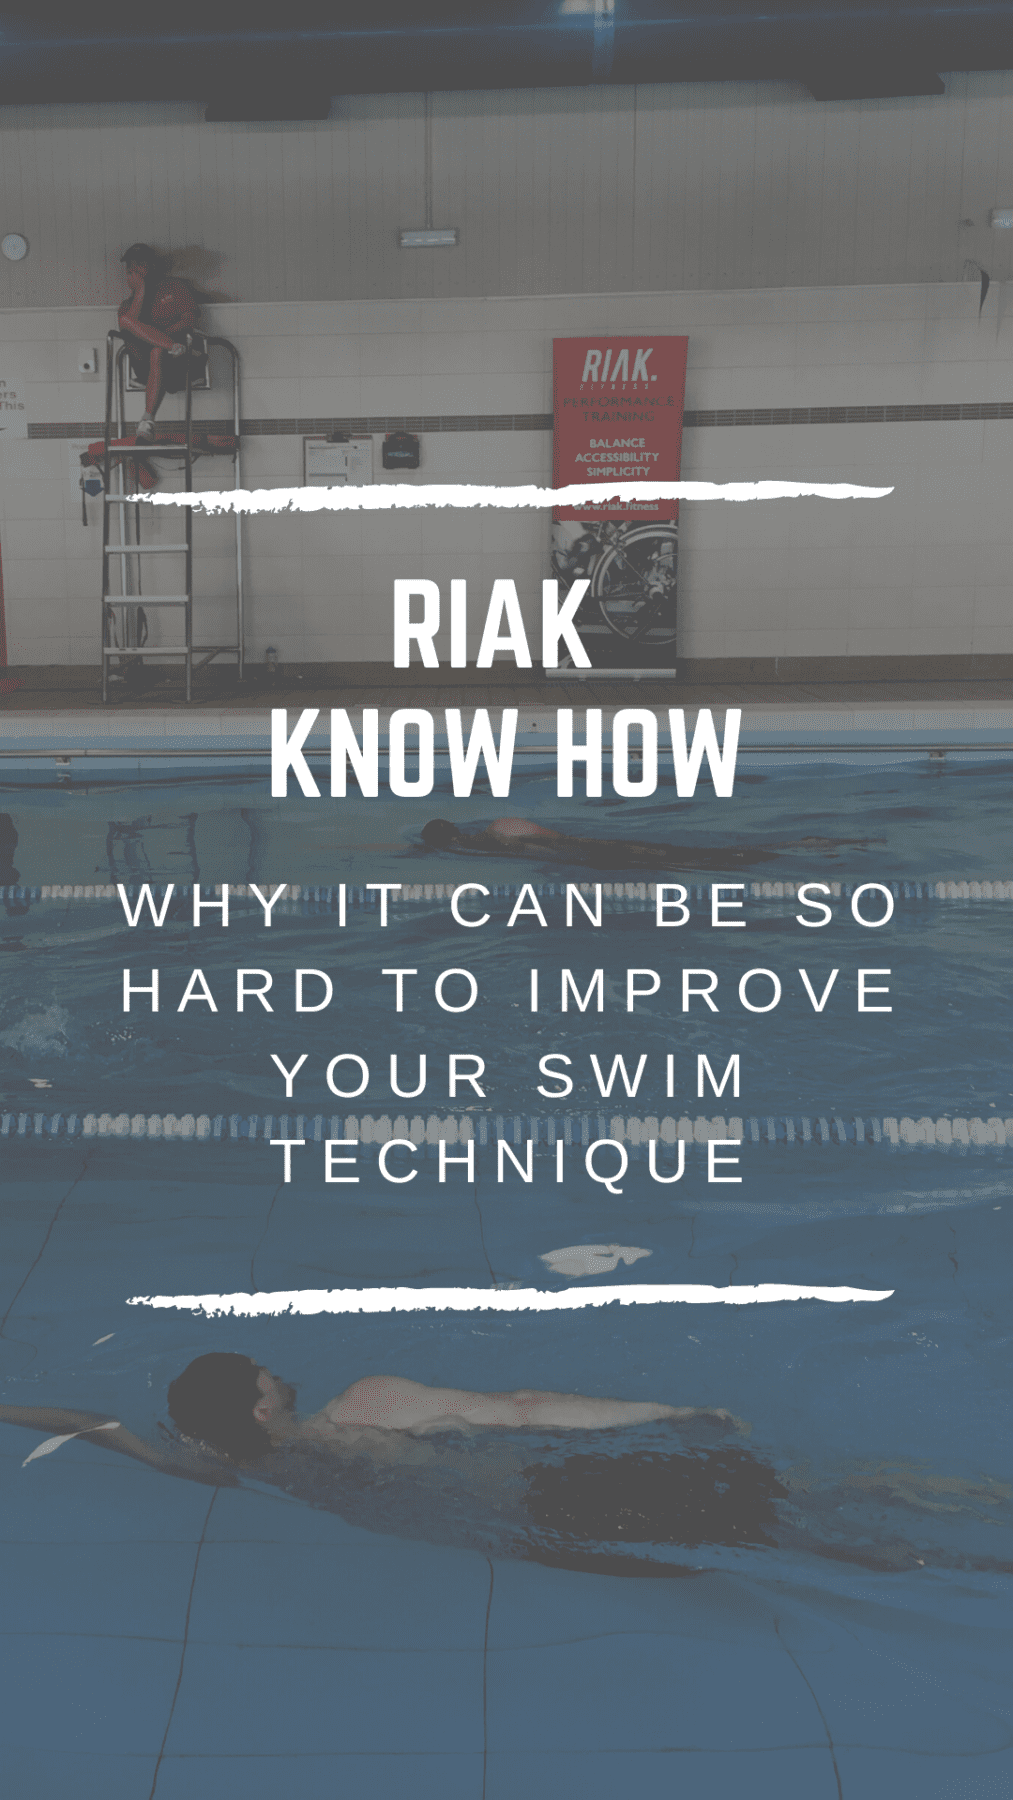 RIAK Know How – Why It Can Be So Hard To Improve Your Swim Technique